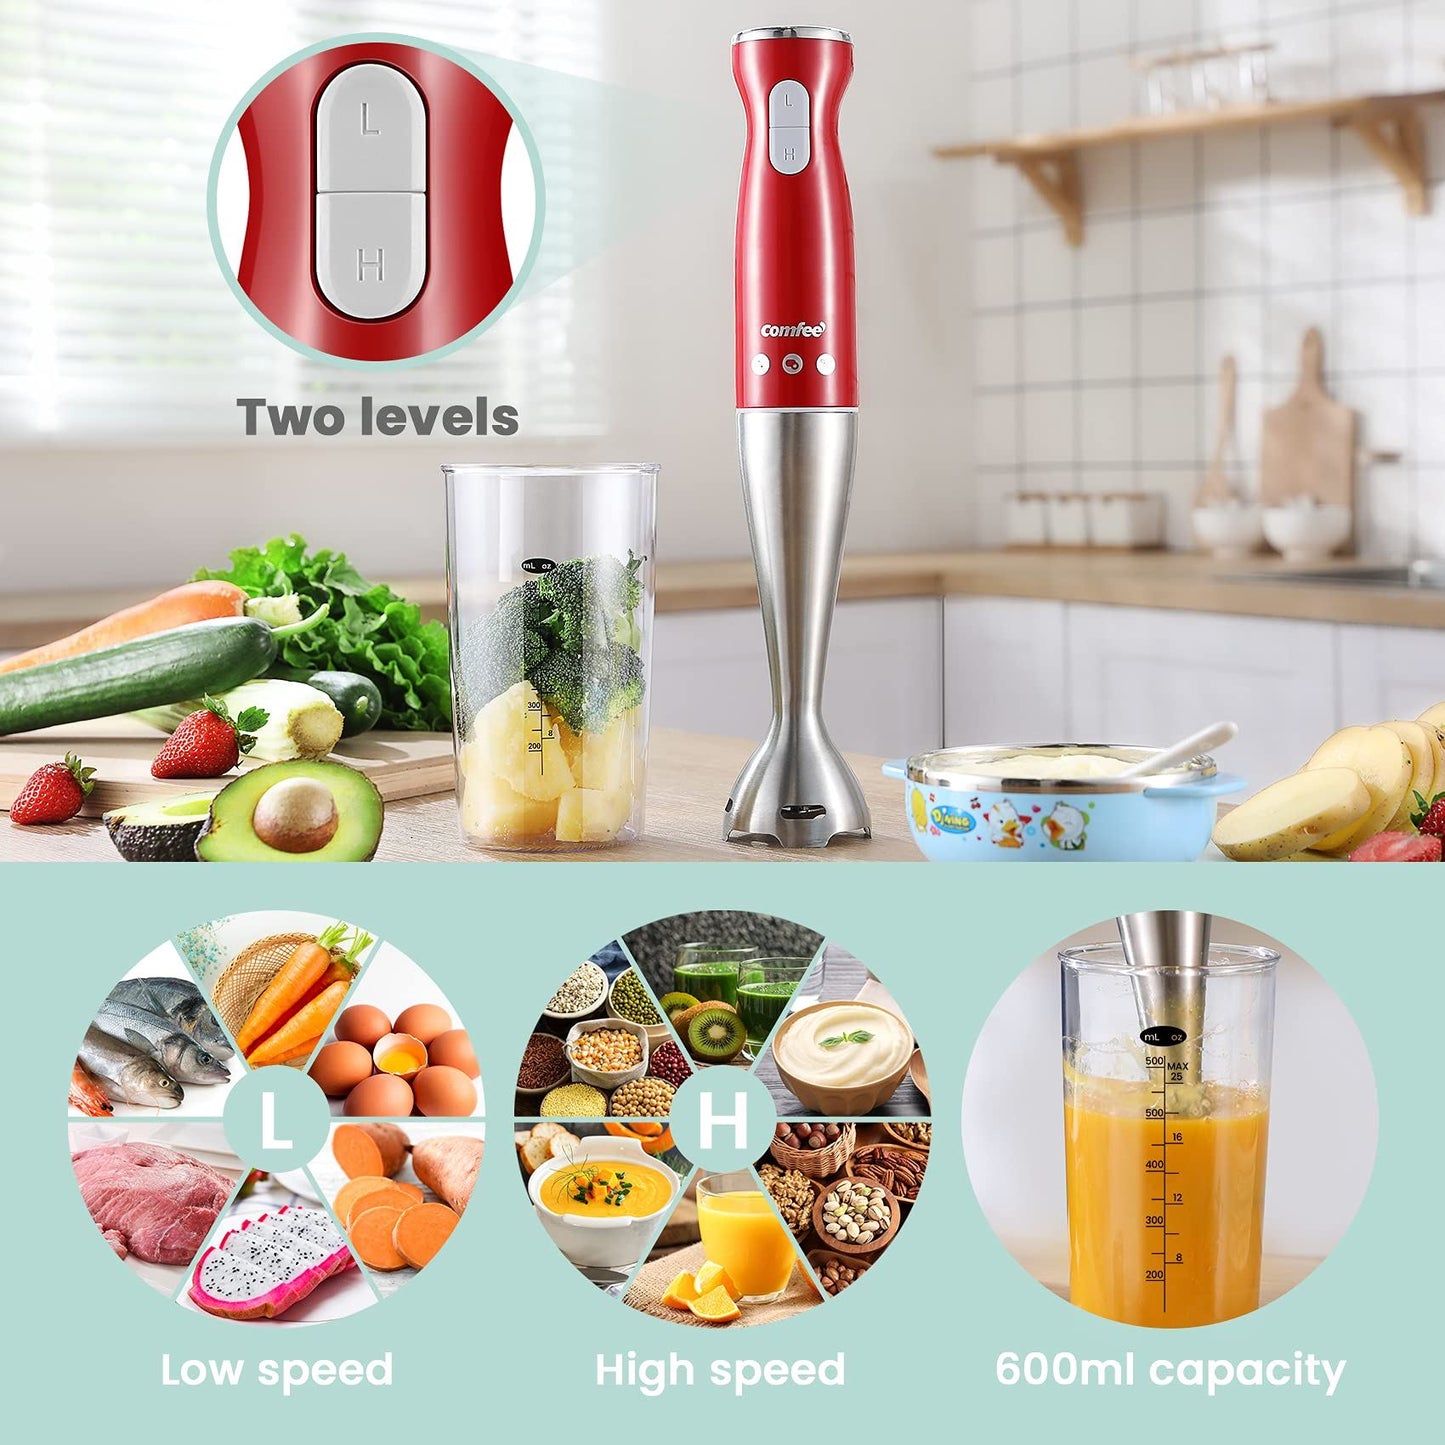 COMFEE' Immersion Hand Blender, Brushed Stainless Steel, 2-Speed, Multipurpose Stick Blender with 550 Watts, 600ml Mixing Beaker and Whisk, Perfect for Baby Food, Smoothies, Sauces and Soups, Red